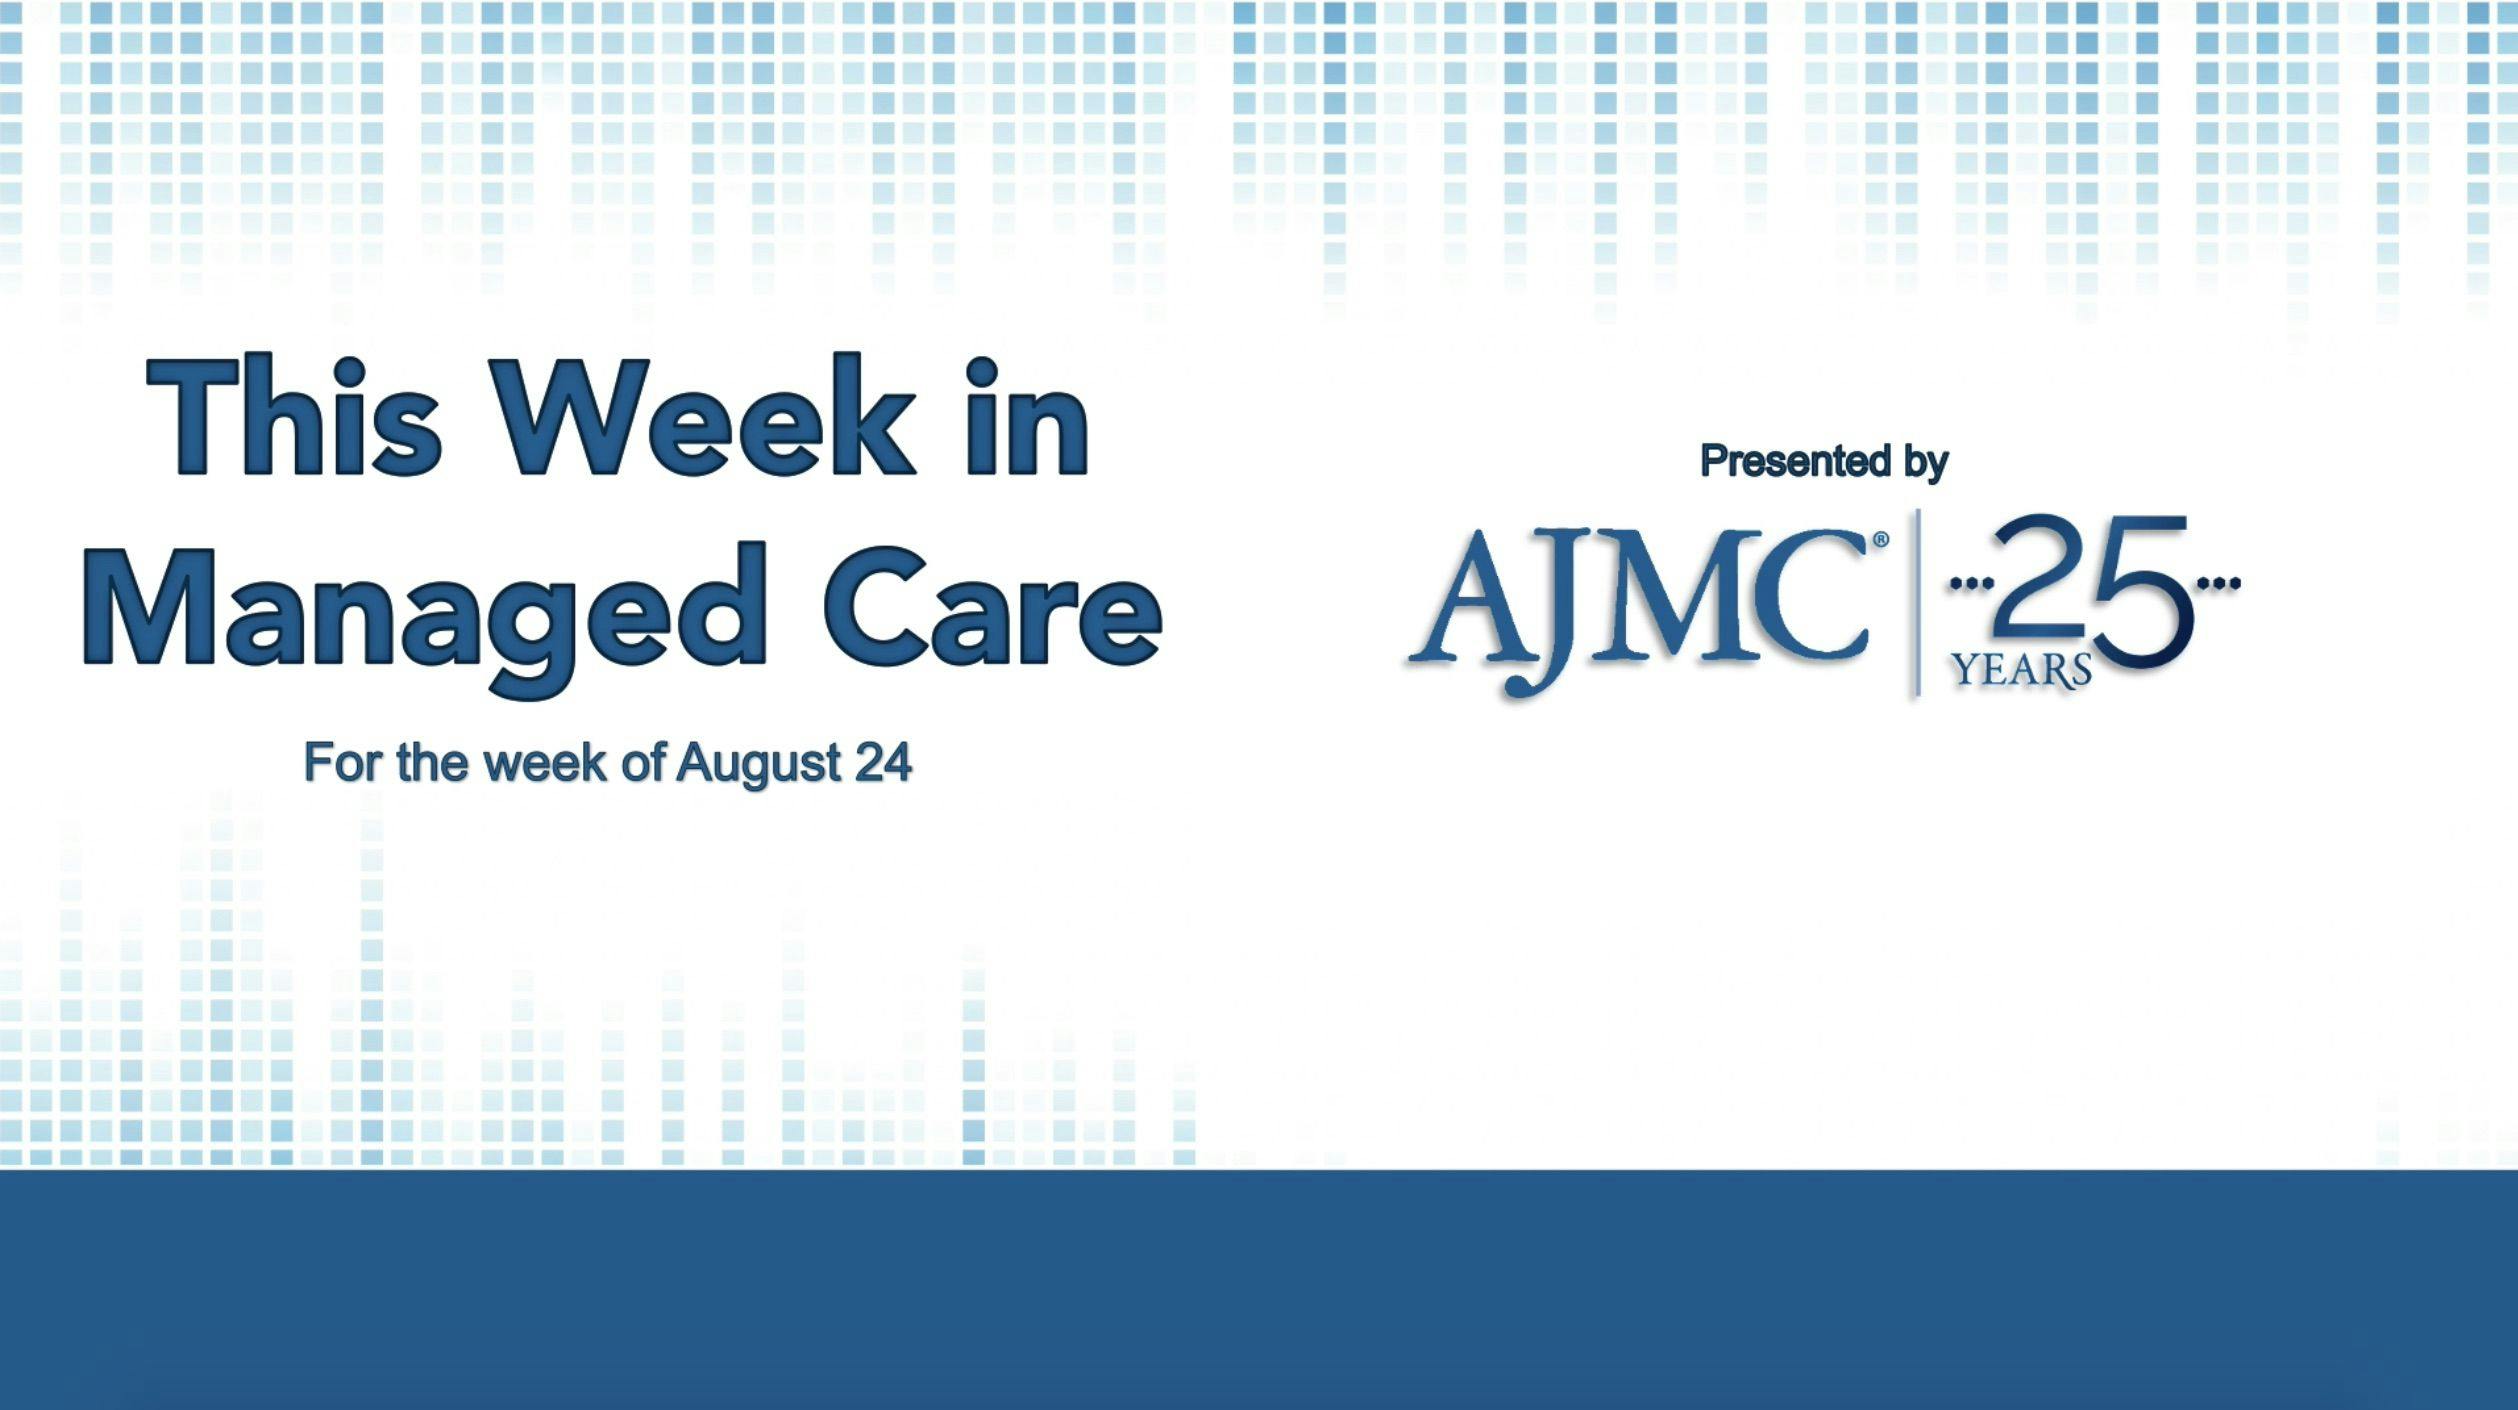 This Week in Managed Care: August 28, 2020